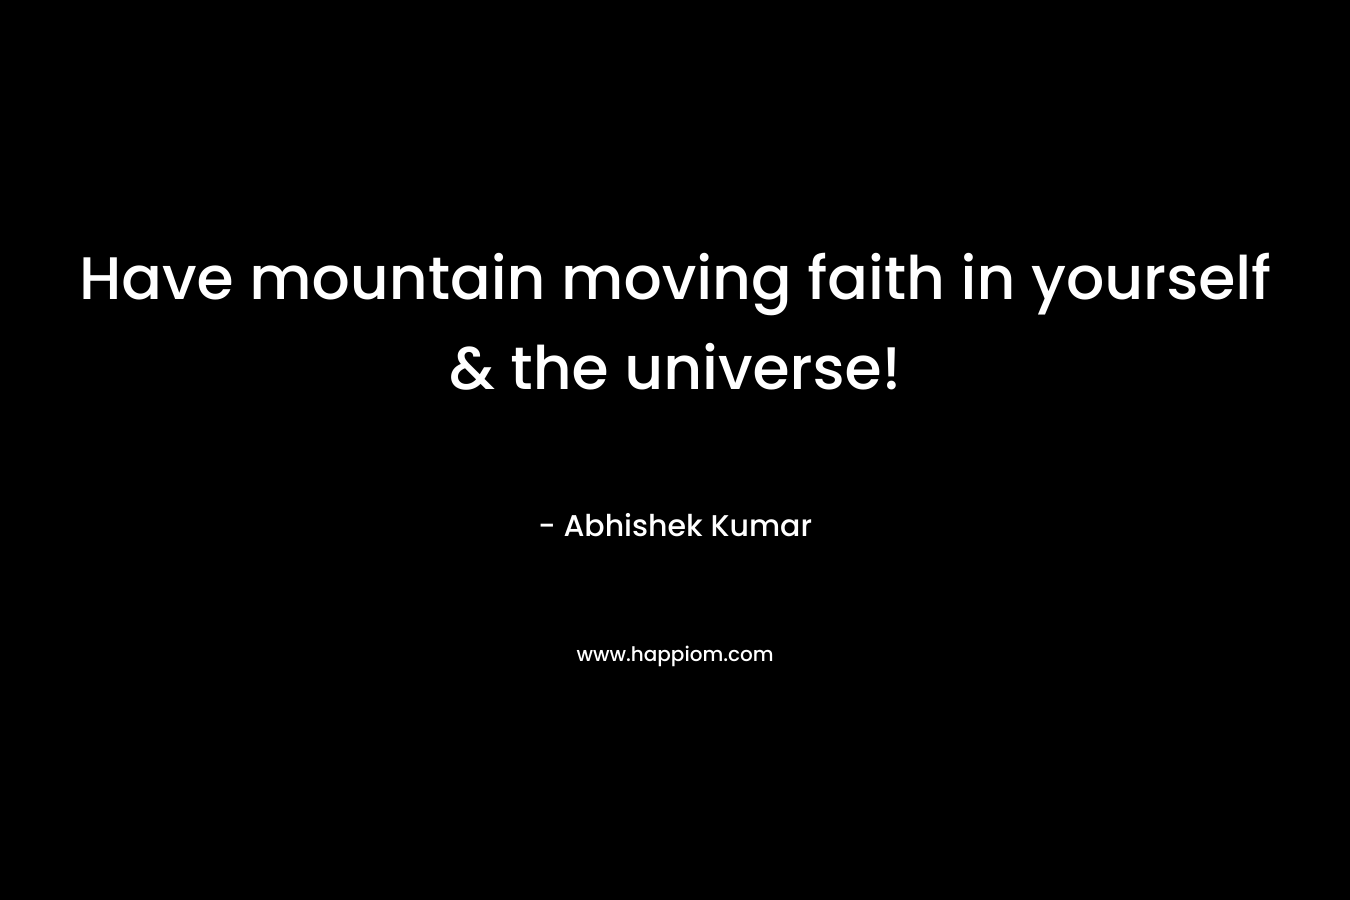 Have mountain moving faith in yourself & the universe!